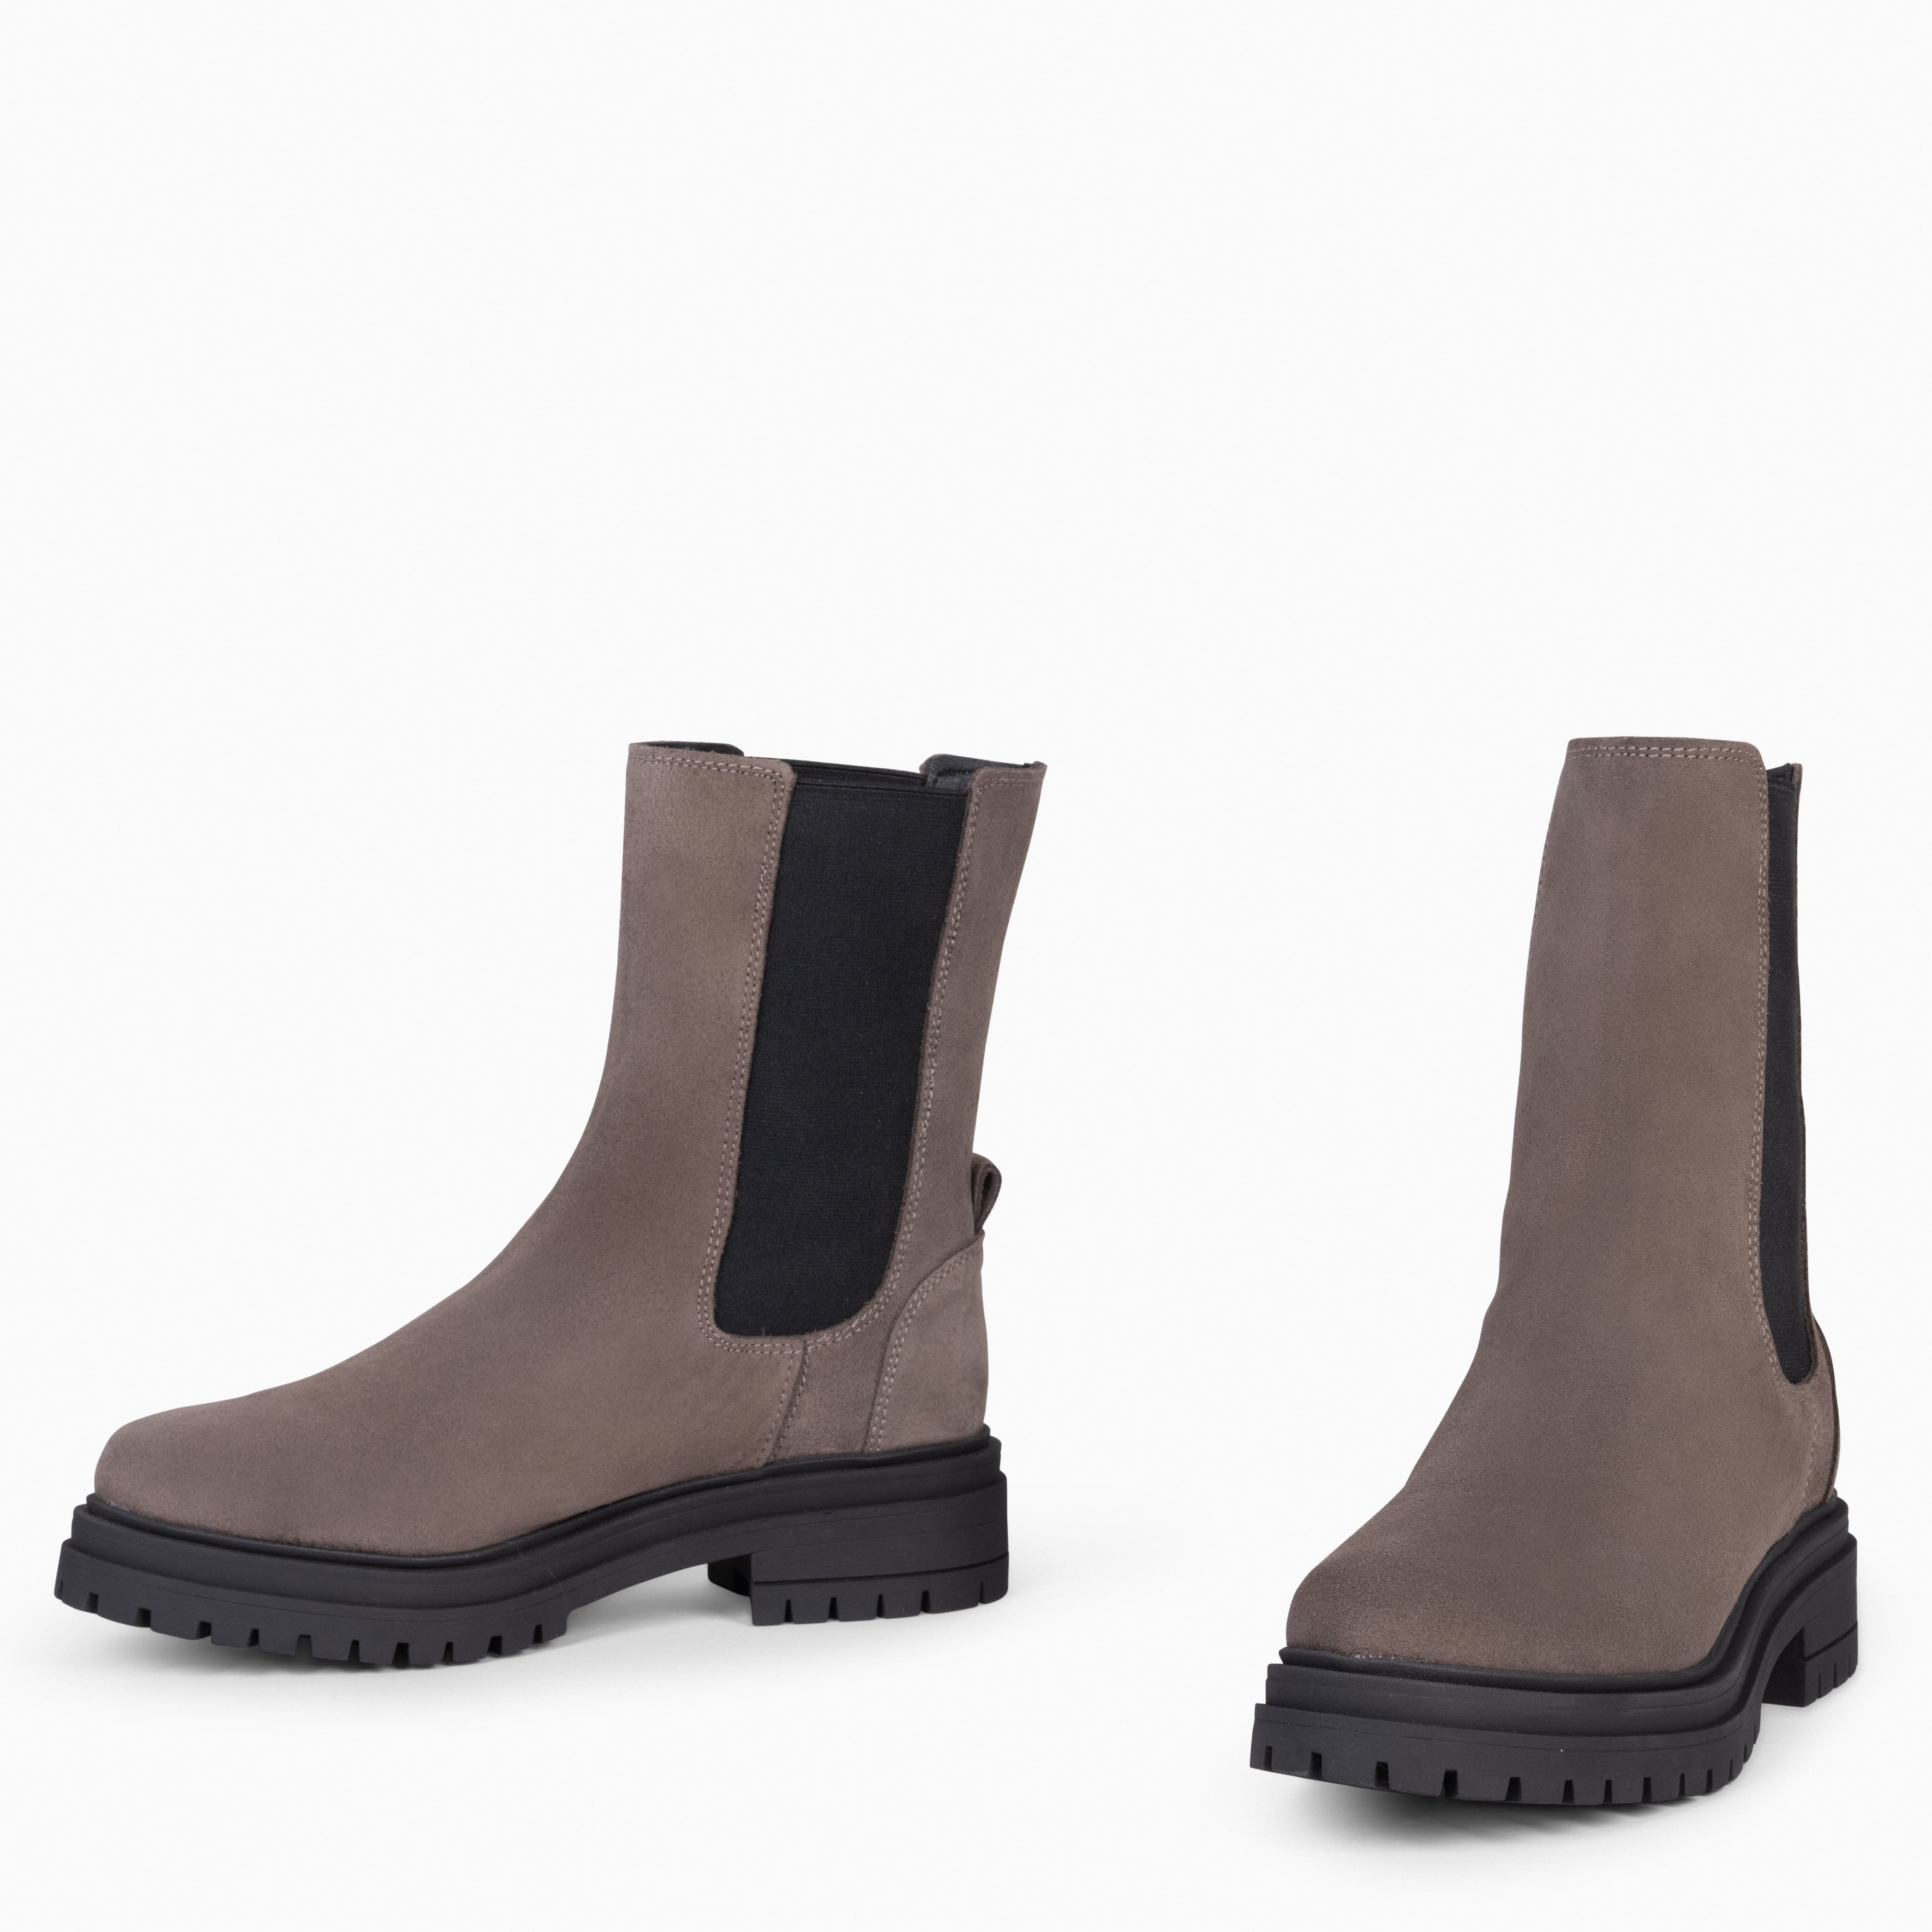 STANFORD – TAUPE Chelsea Boots with Track Platform